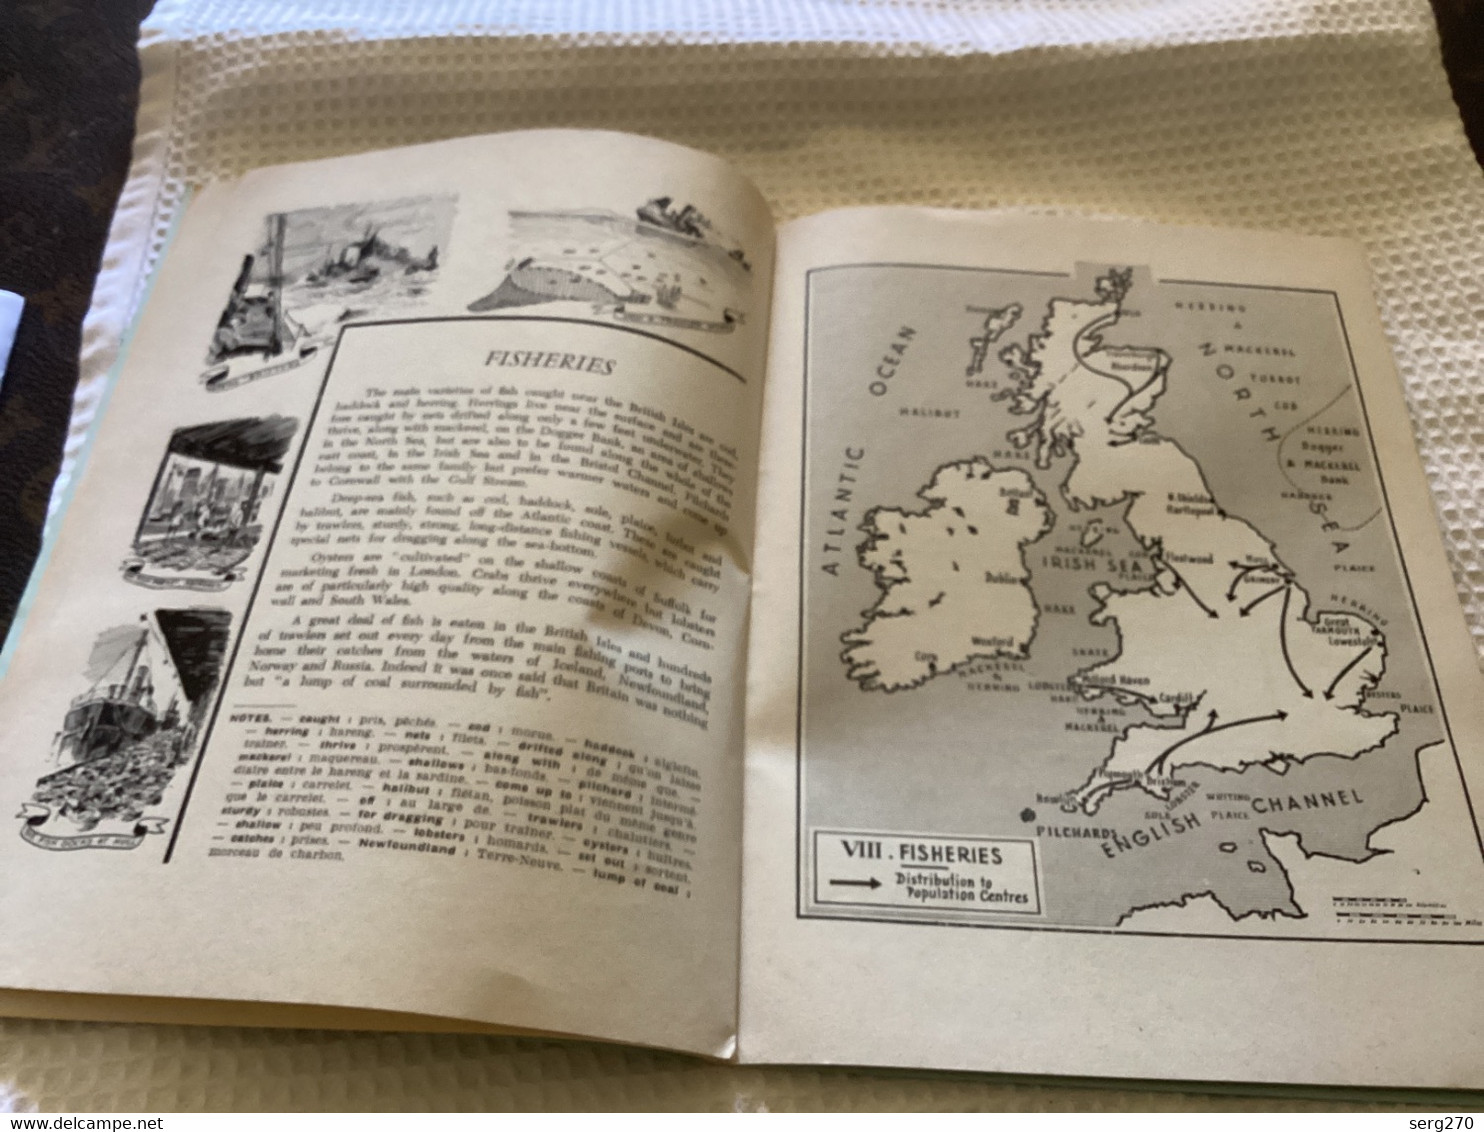 THE NEW BRITON - SPECIAL NUMBER - APRIL 1957 / GEOGRAPHY OF BRITAIN. - COLLECTIF - 1957